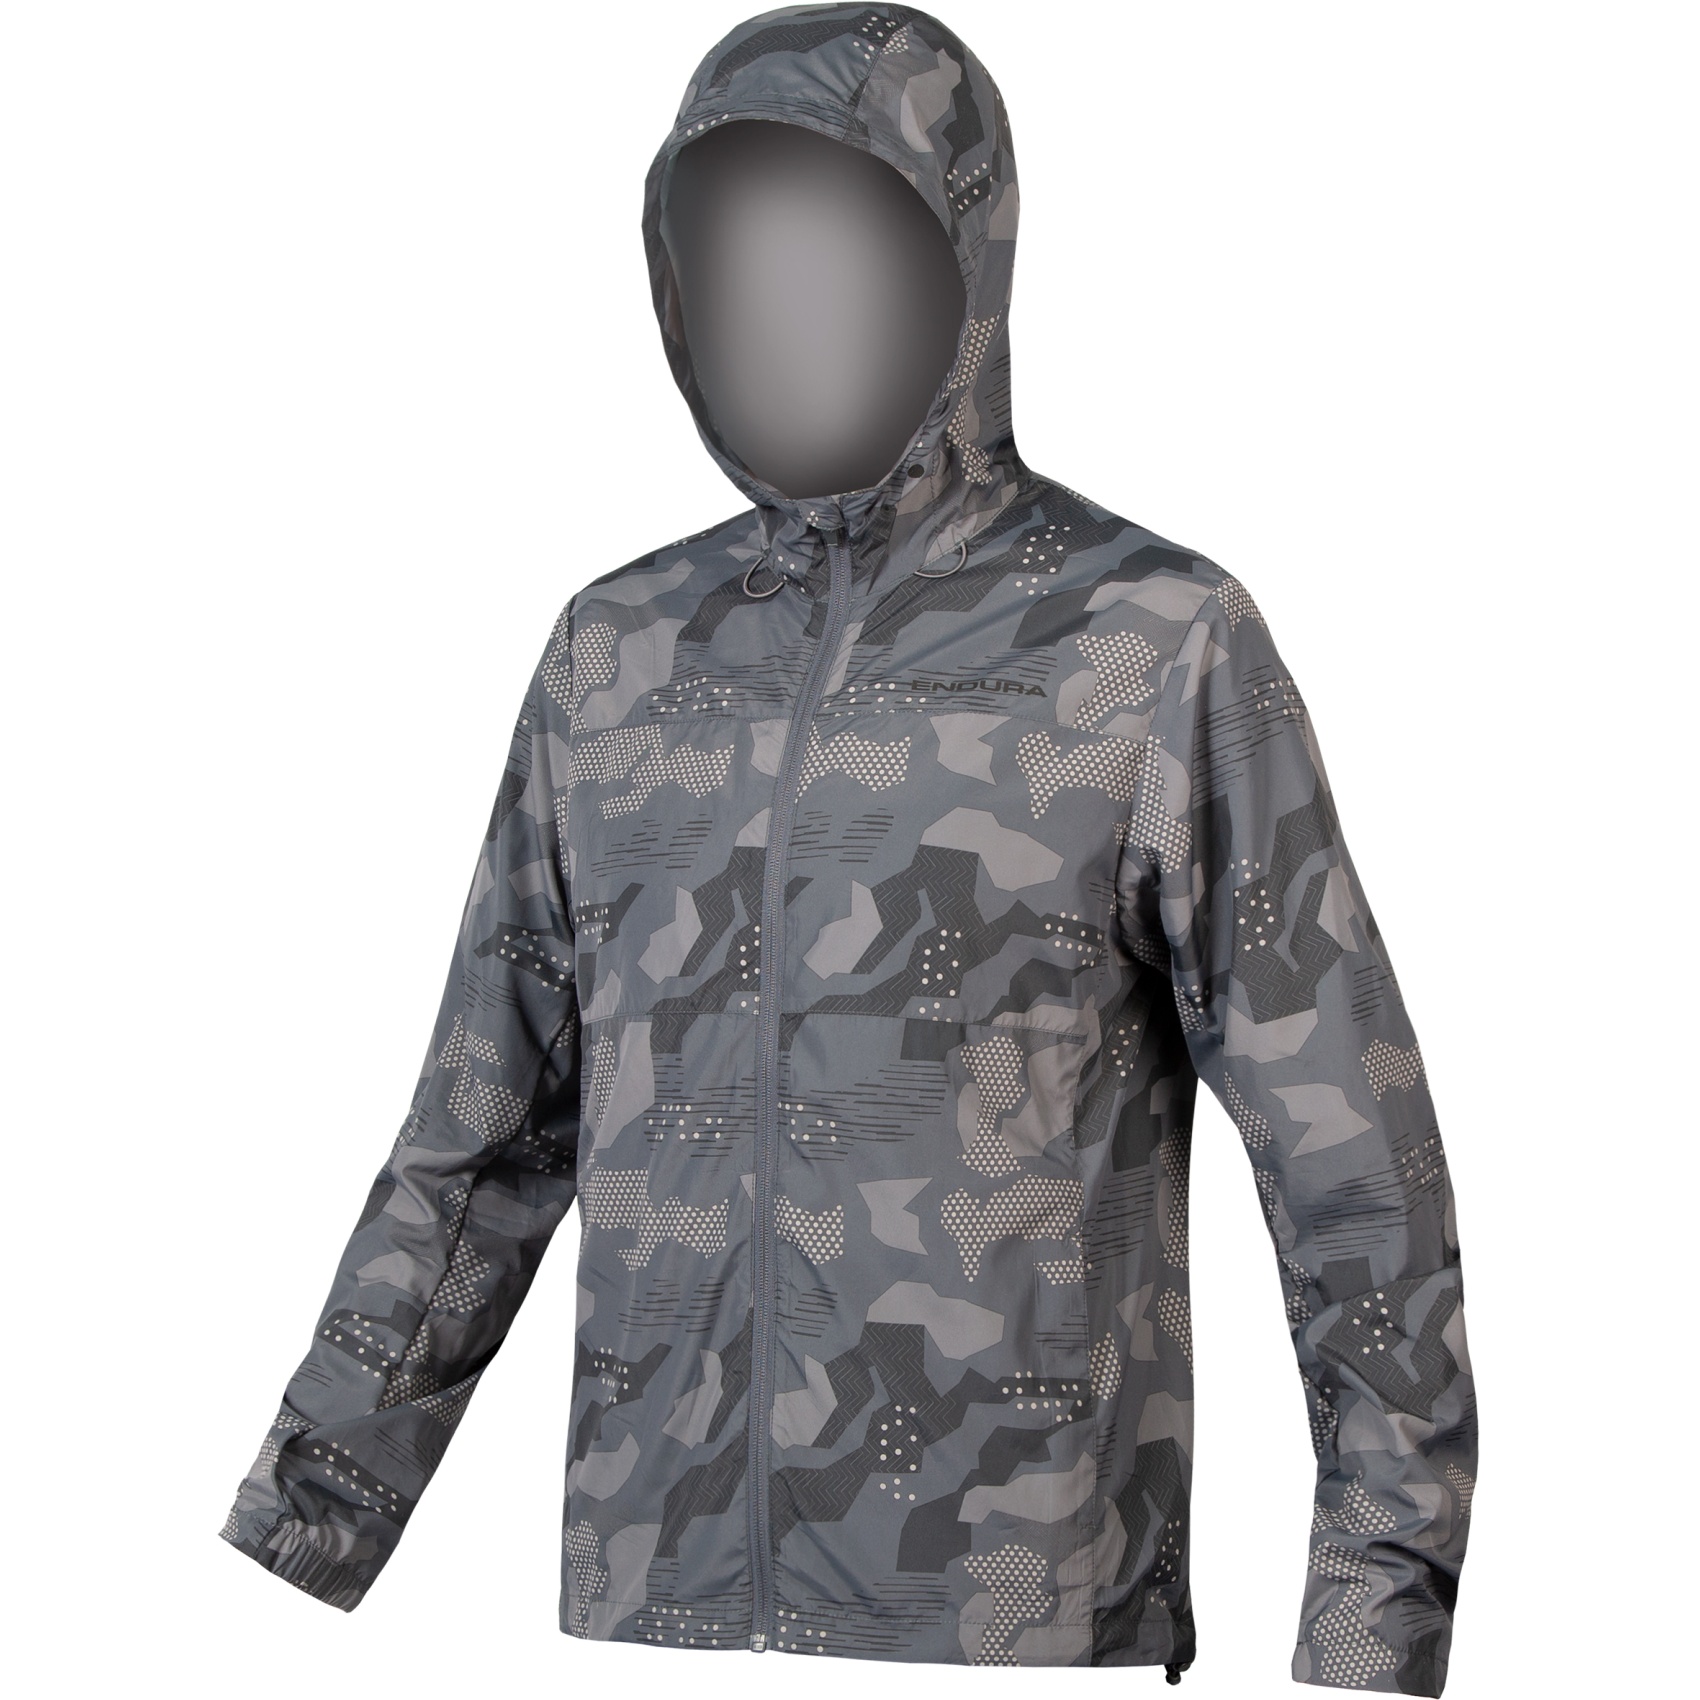 Picture of Endura Hummvee Windproof Shell Jacket - camouflage grey